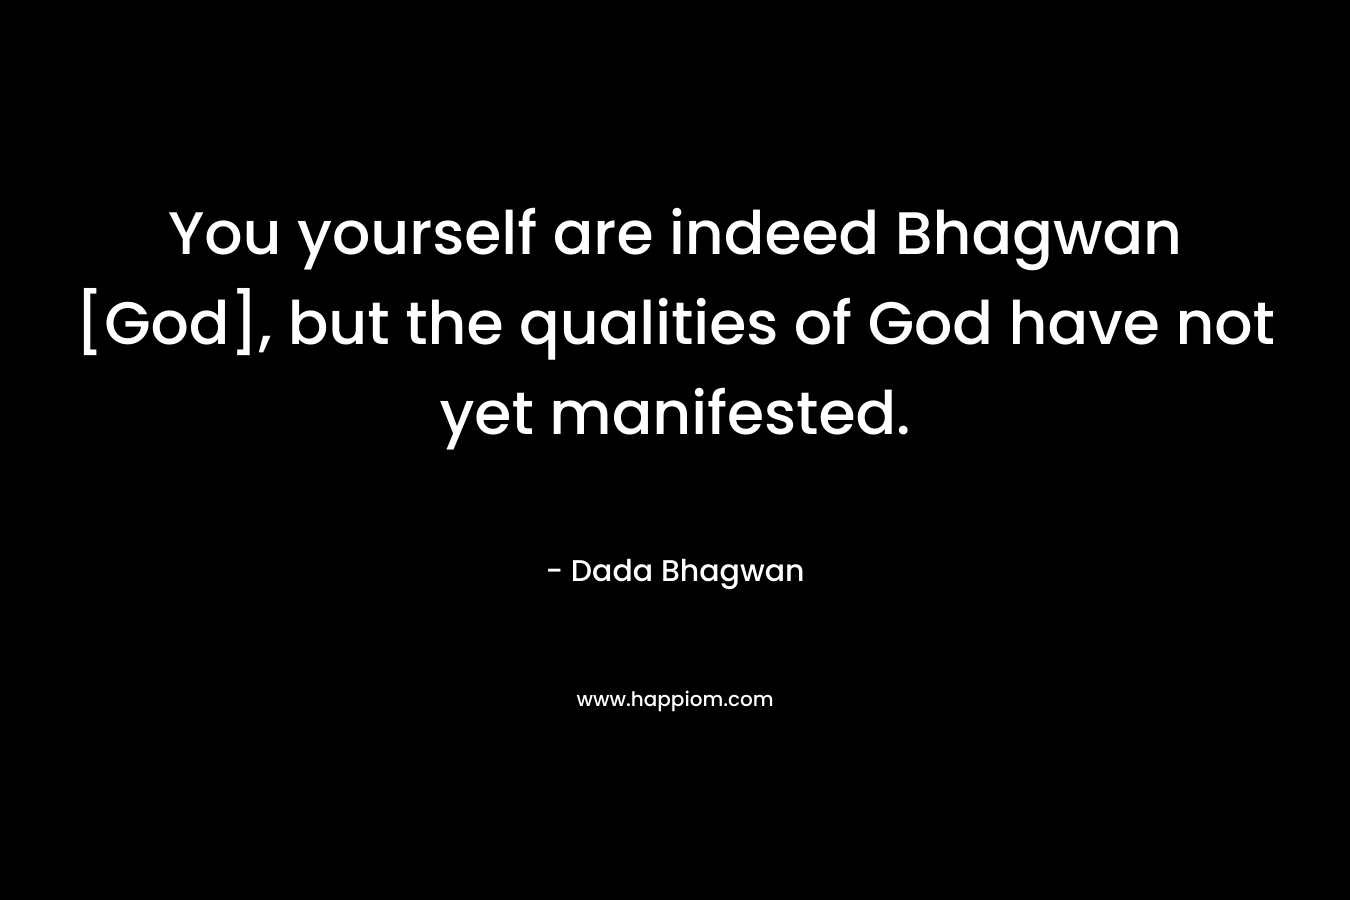 You yourself are indeed Bhagwan [God], but the qualities of God have not yet manifested.